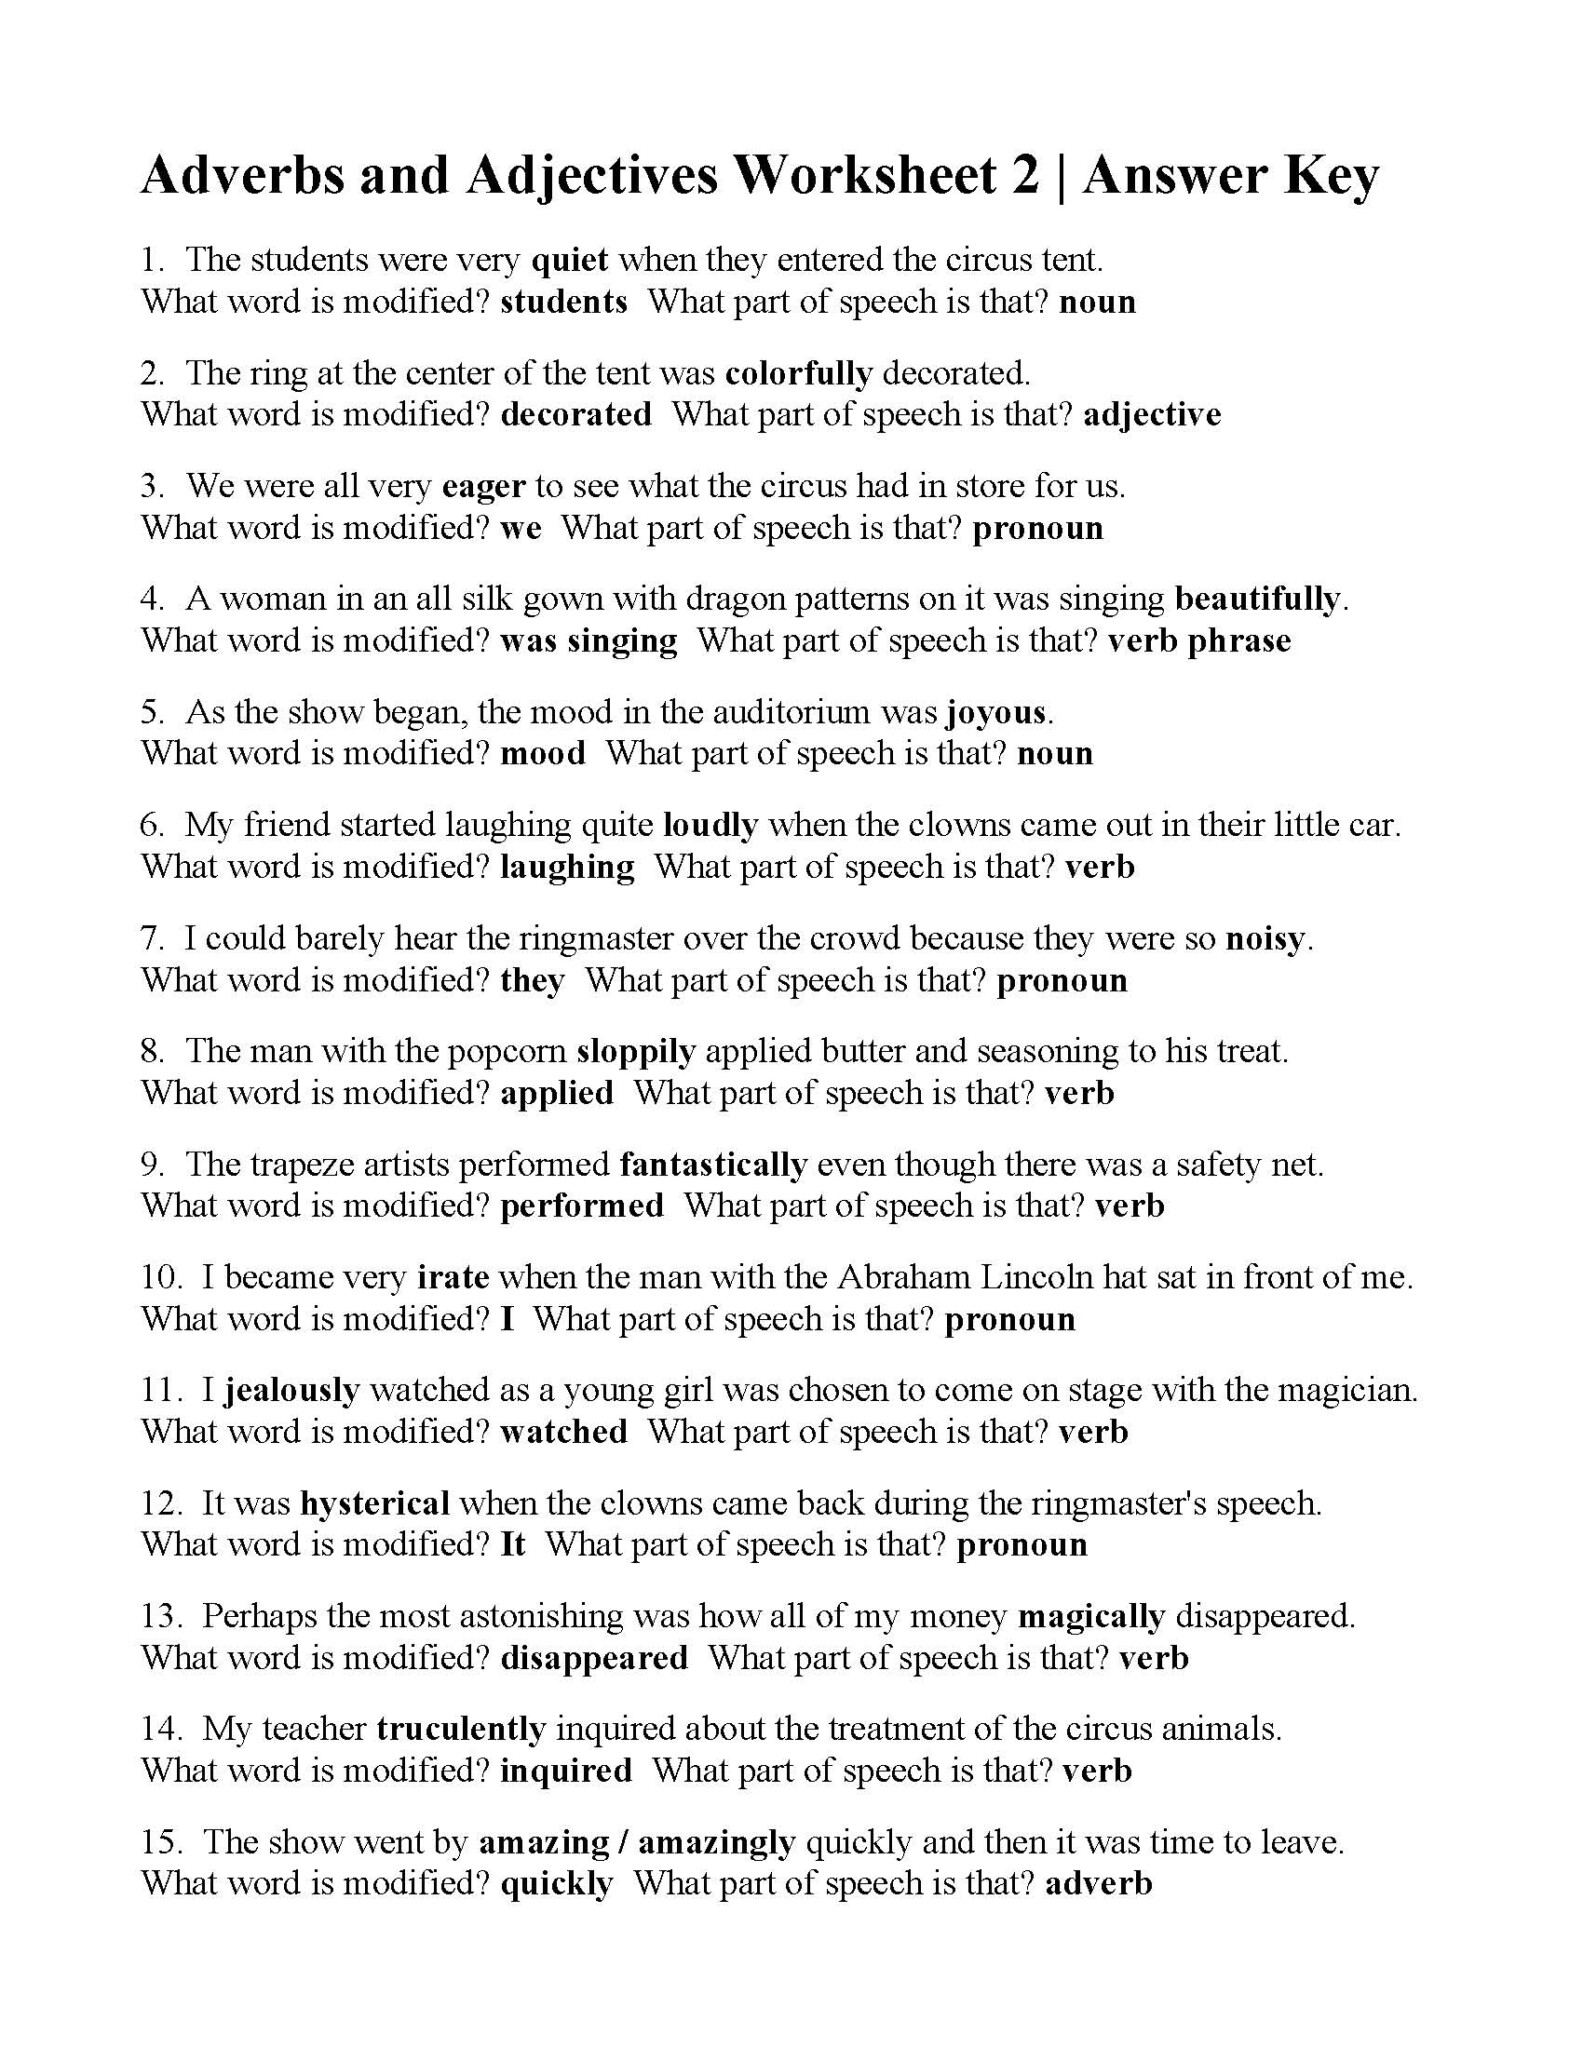 adjective-adverb-clauses-worksheet-with-answers-pdf-adverbworksheets